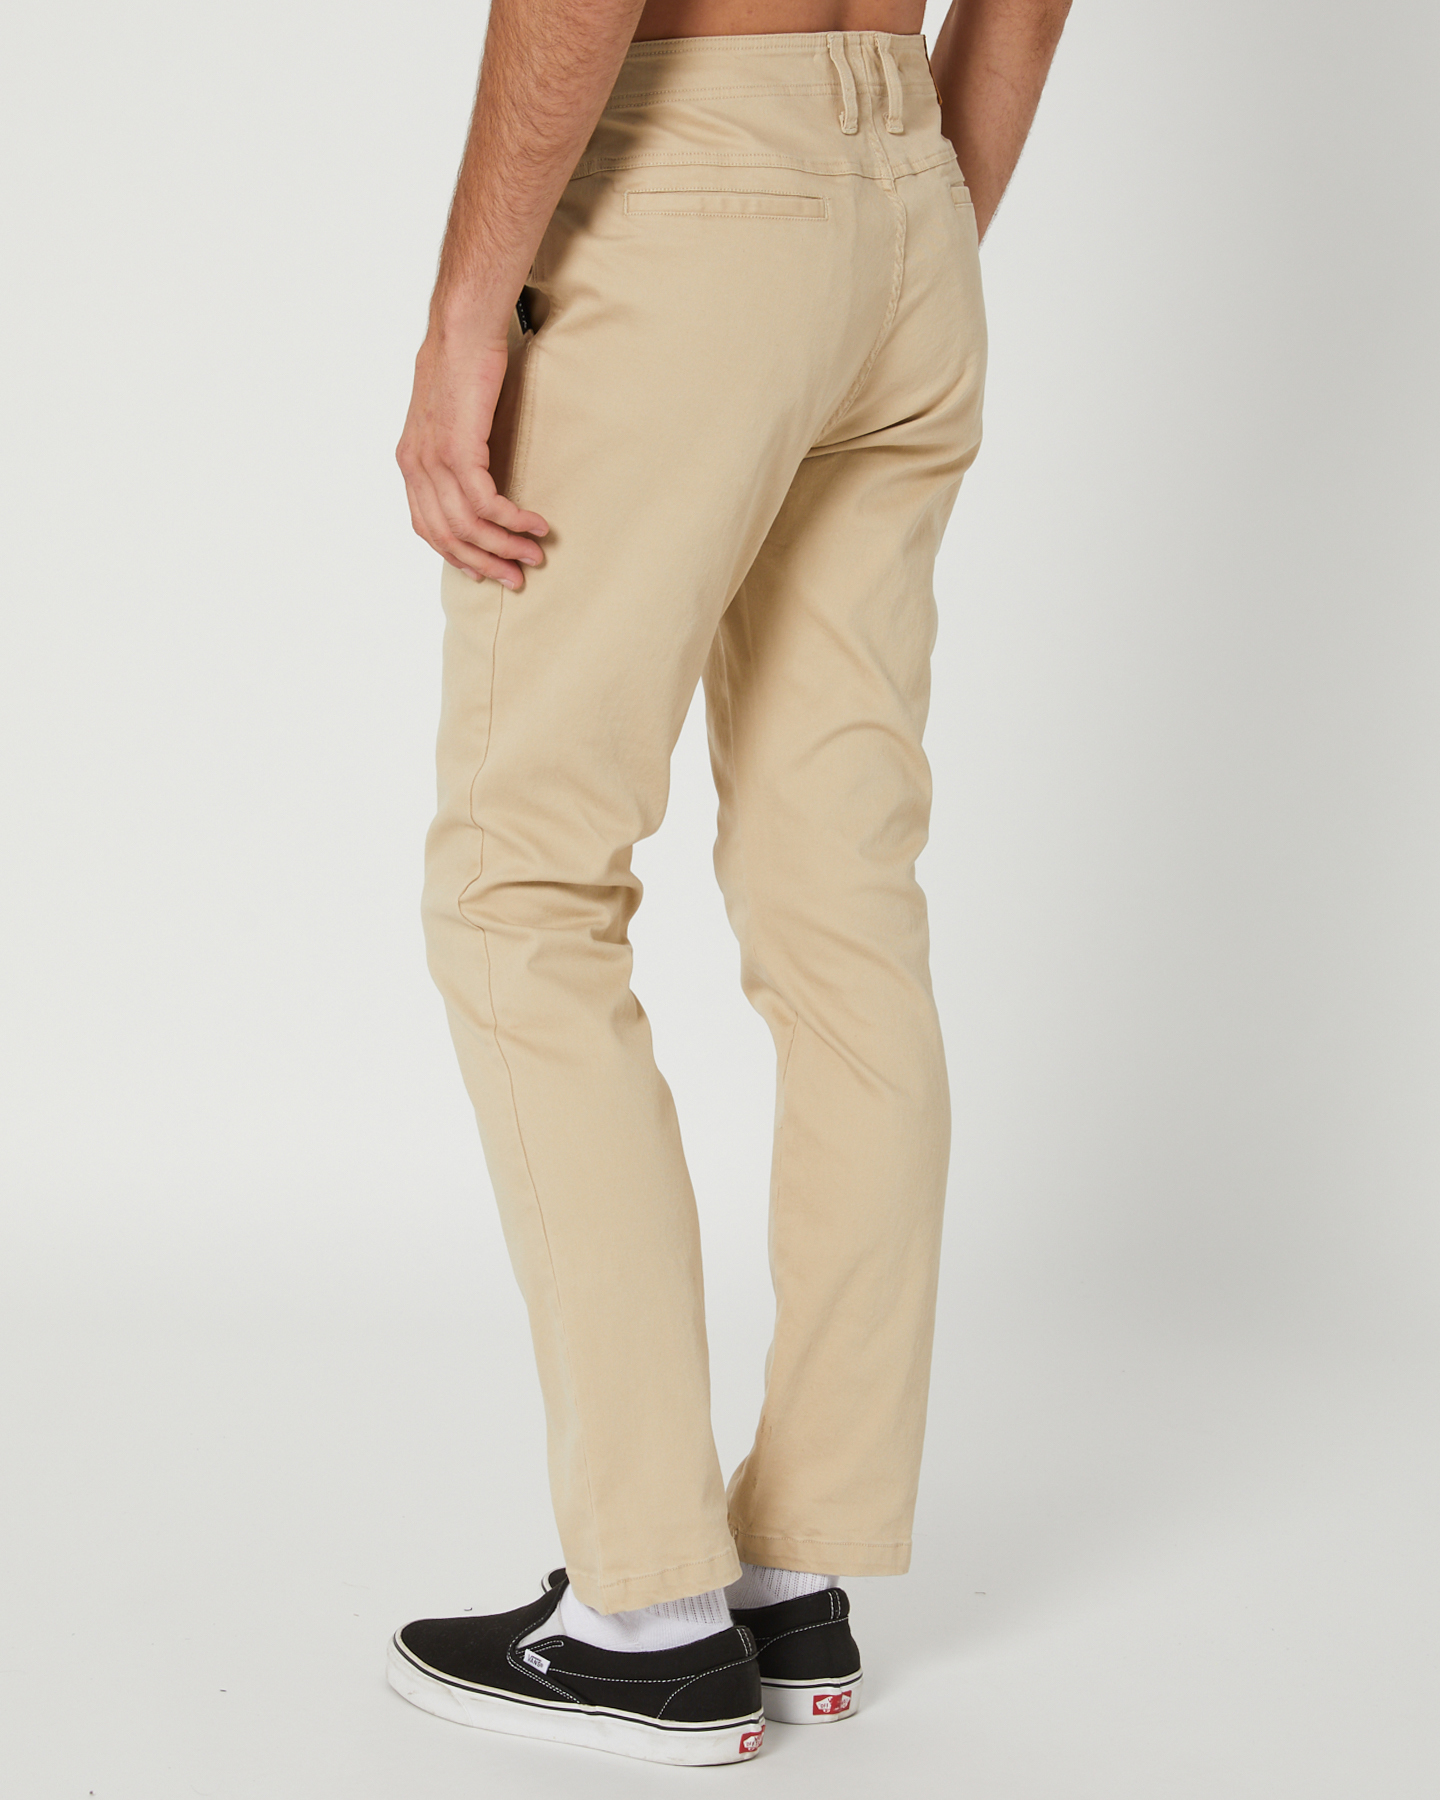 Rusty John The 2Nd Mens Chino Pant - Light Fennel | SurfStitch